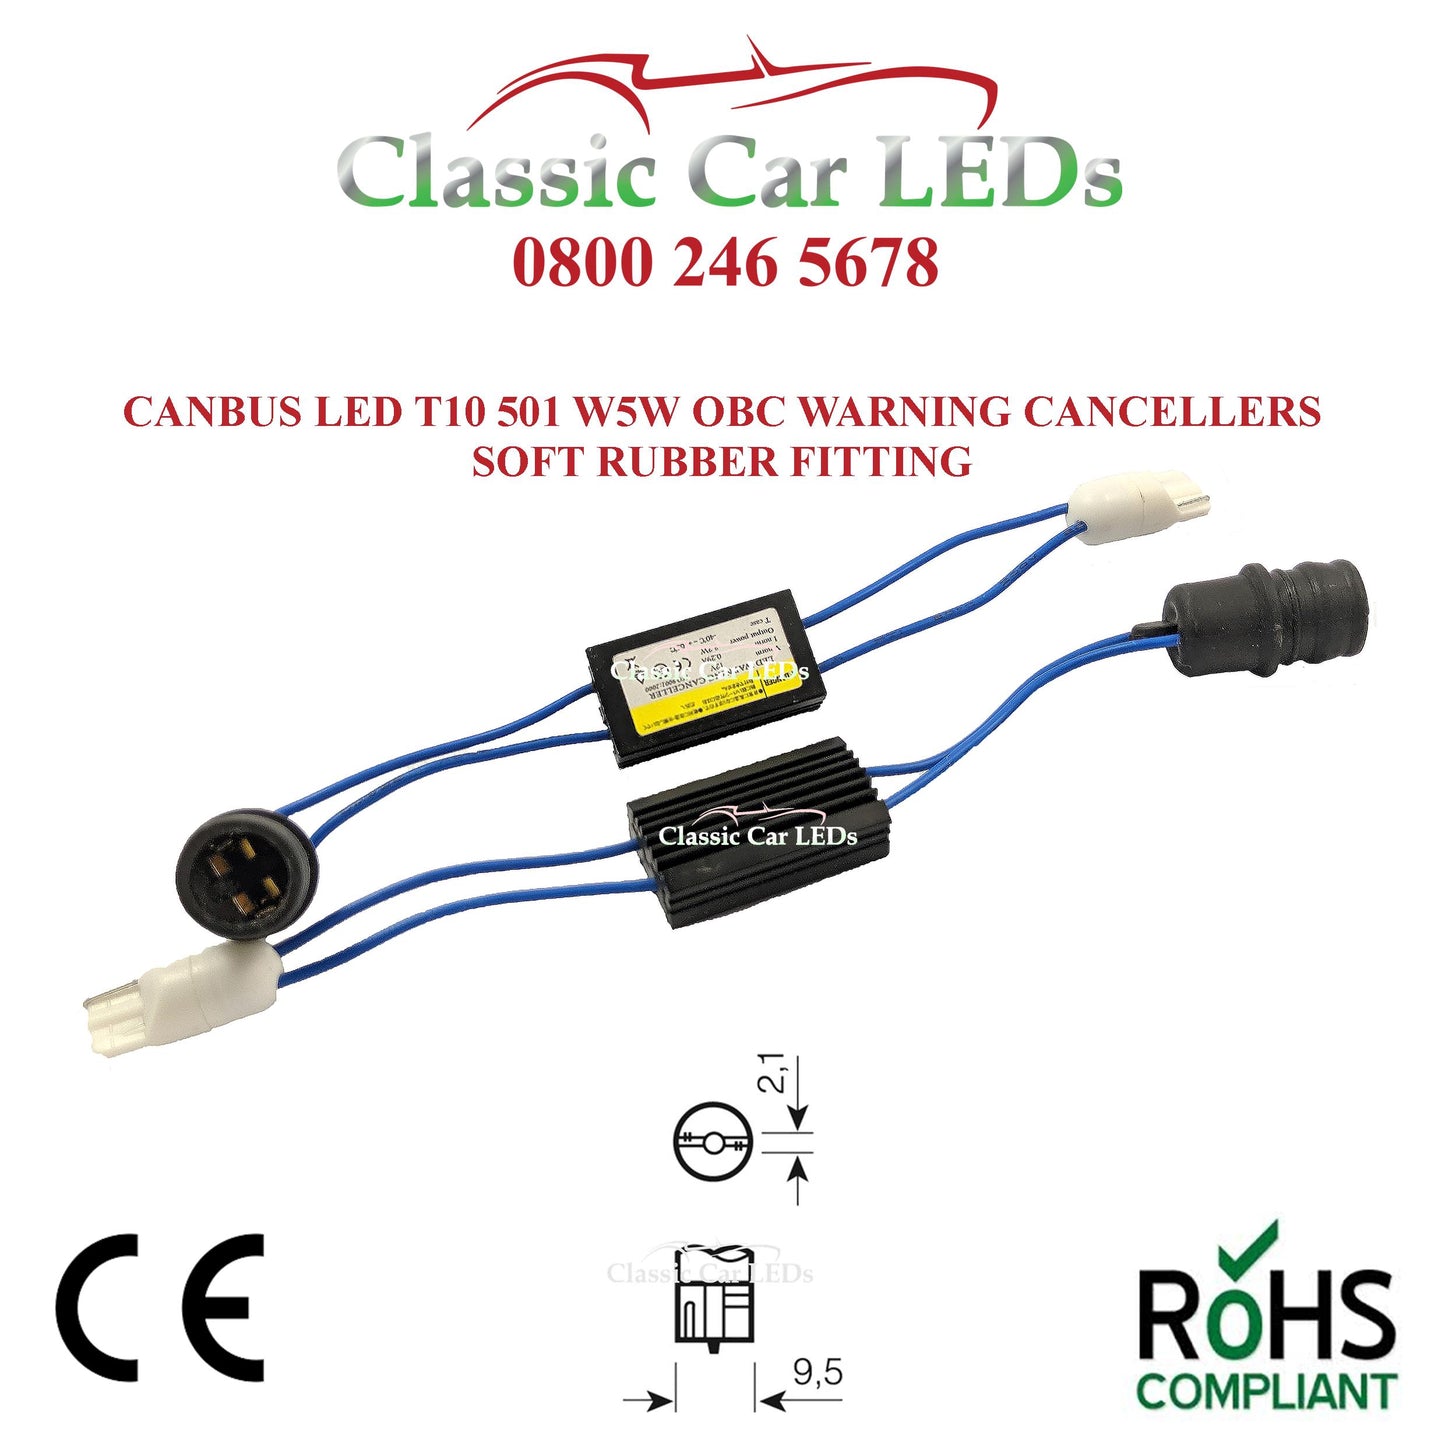 2x CANBUS LED T10 501 W5W OBC WARNING CANCELLERS SOFT RUBBER FITTING